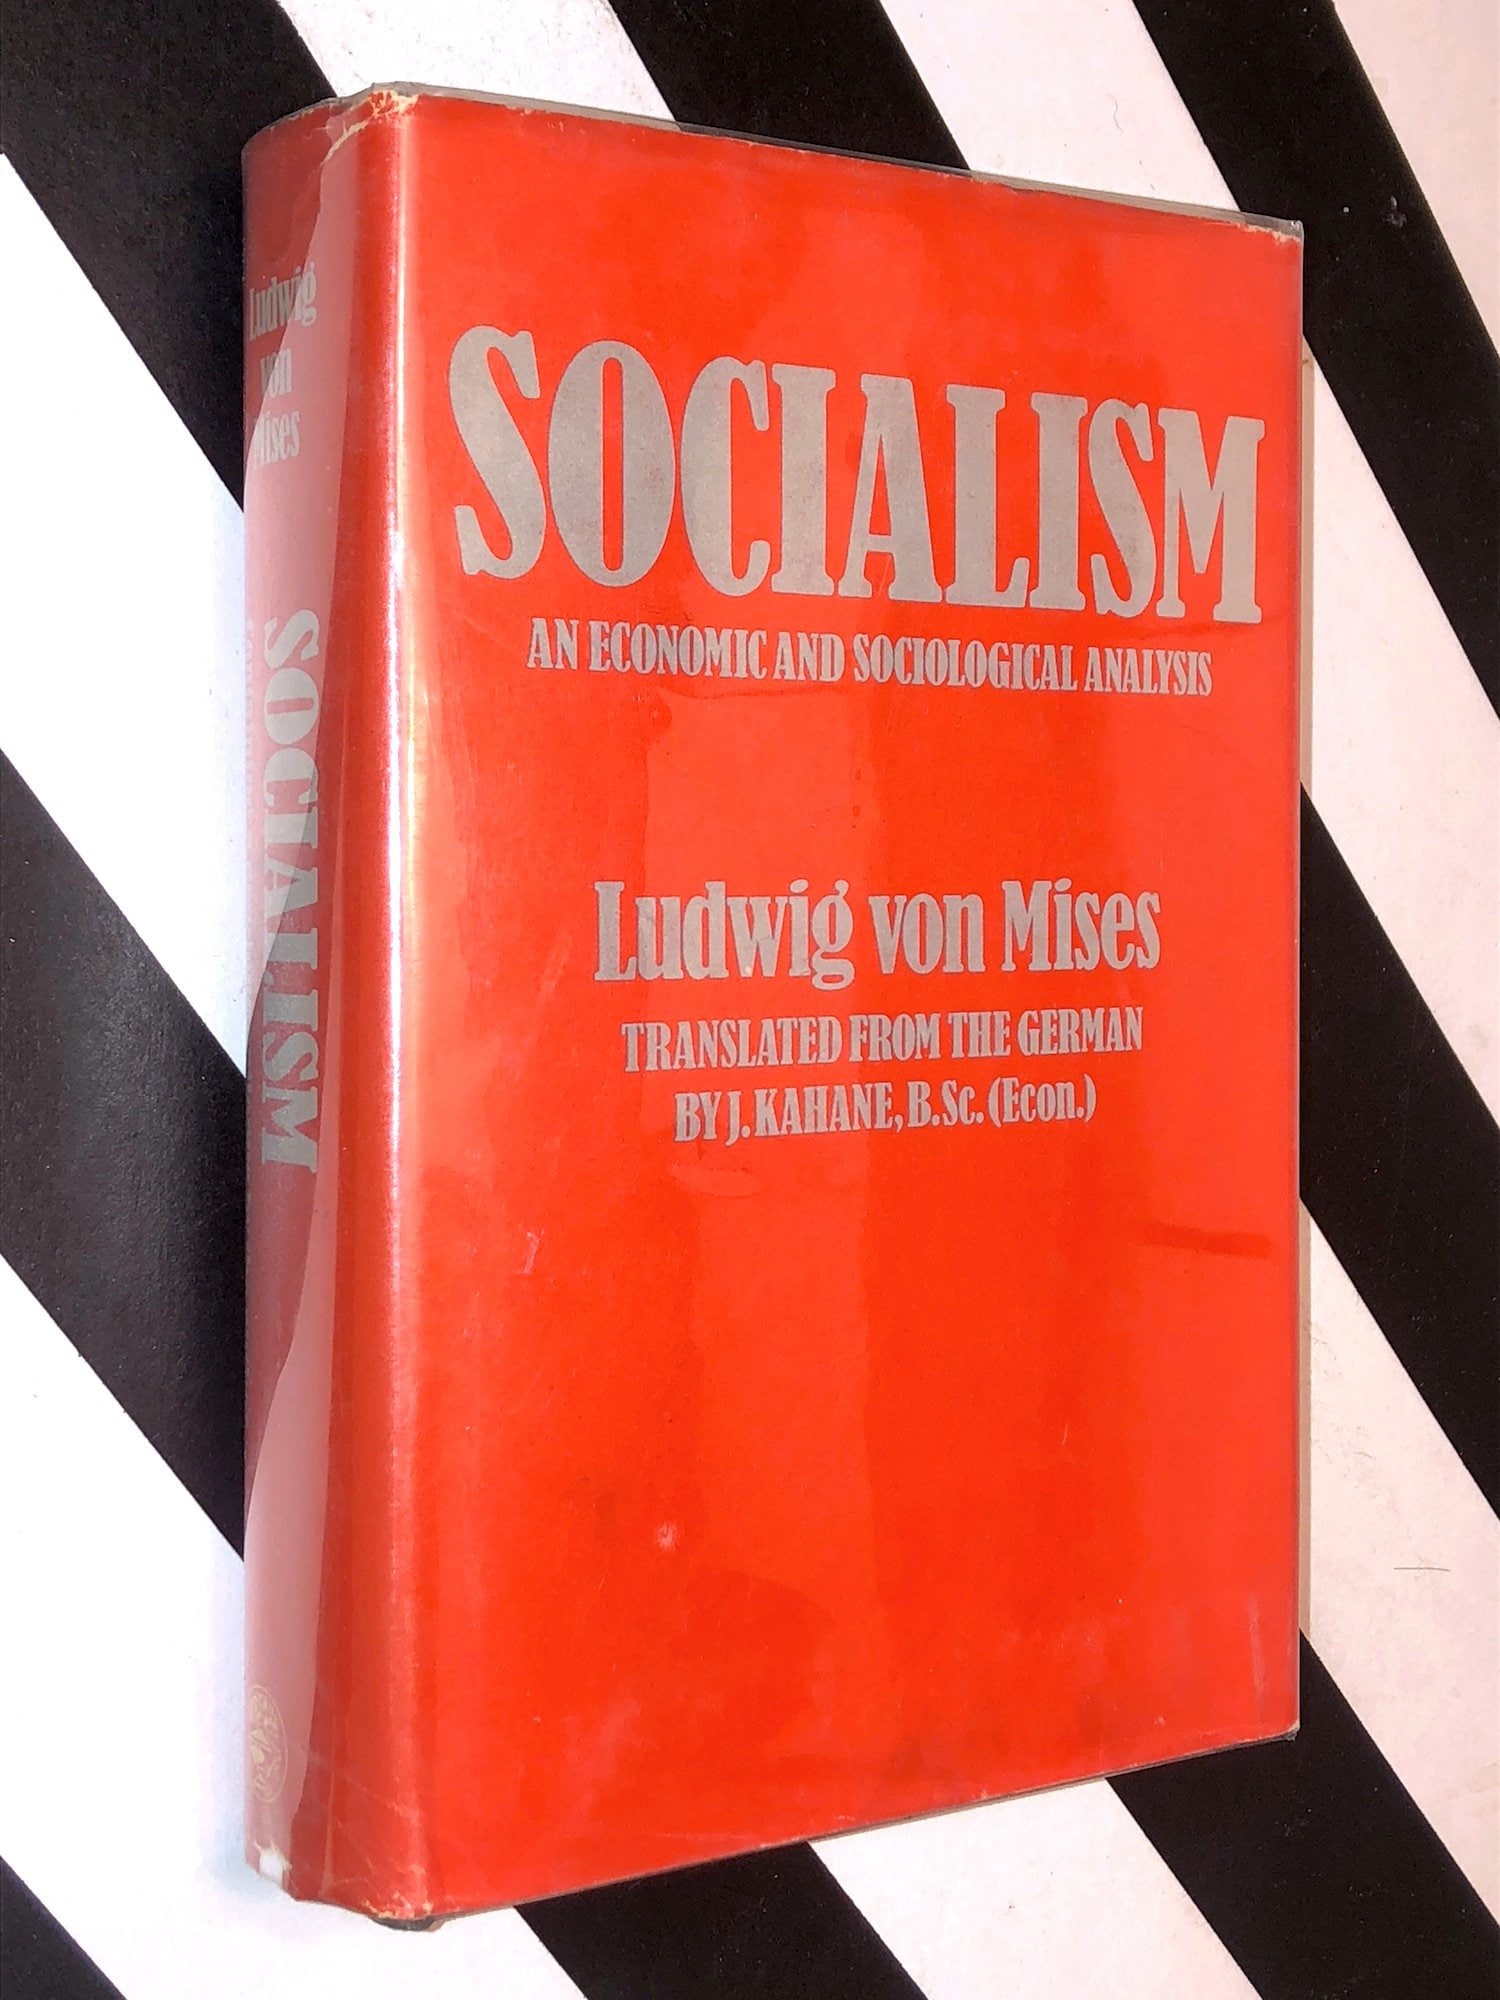 Socialism by Ludwig Von Mises (1951) hardcover book